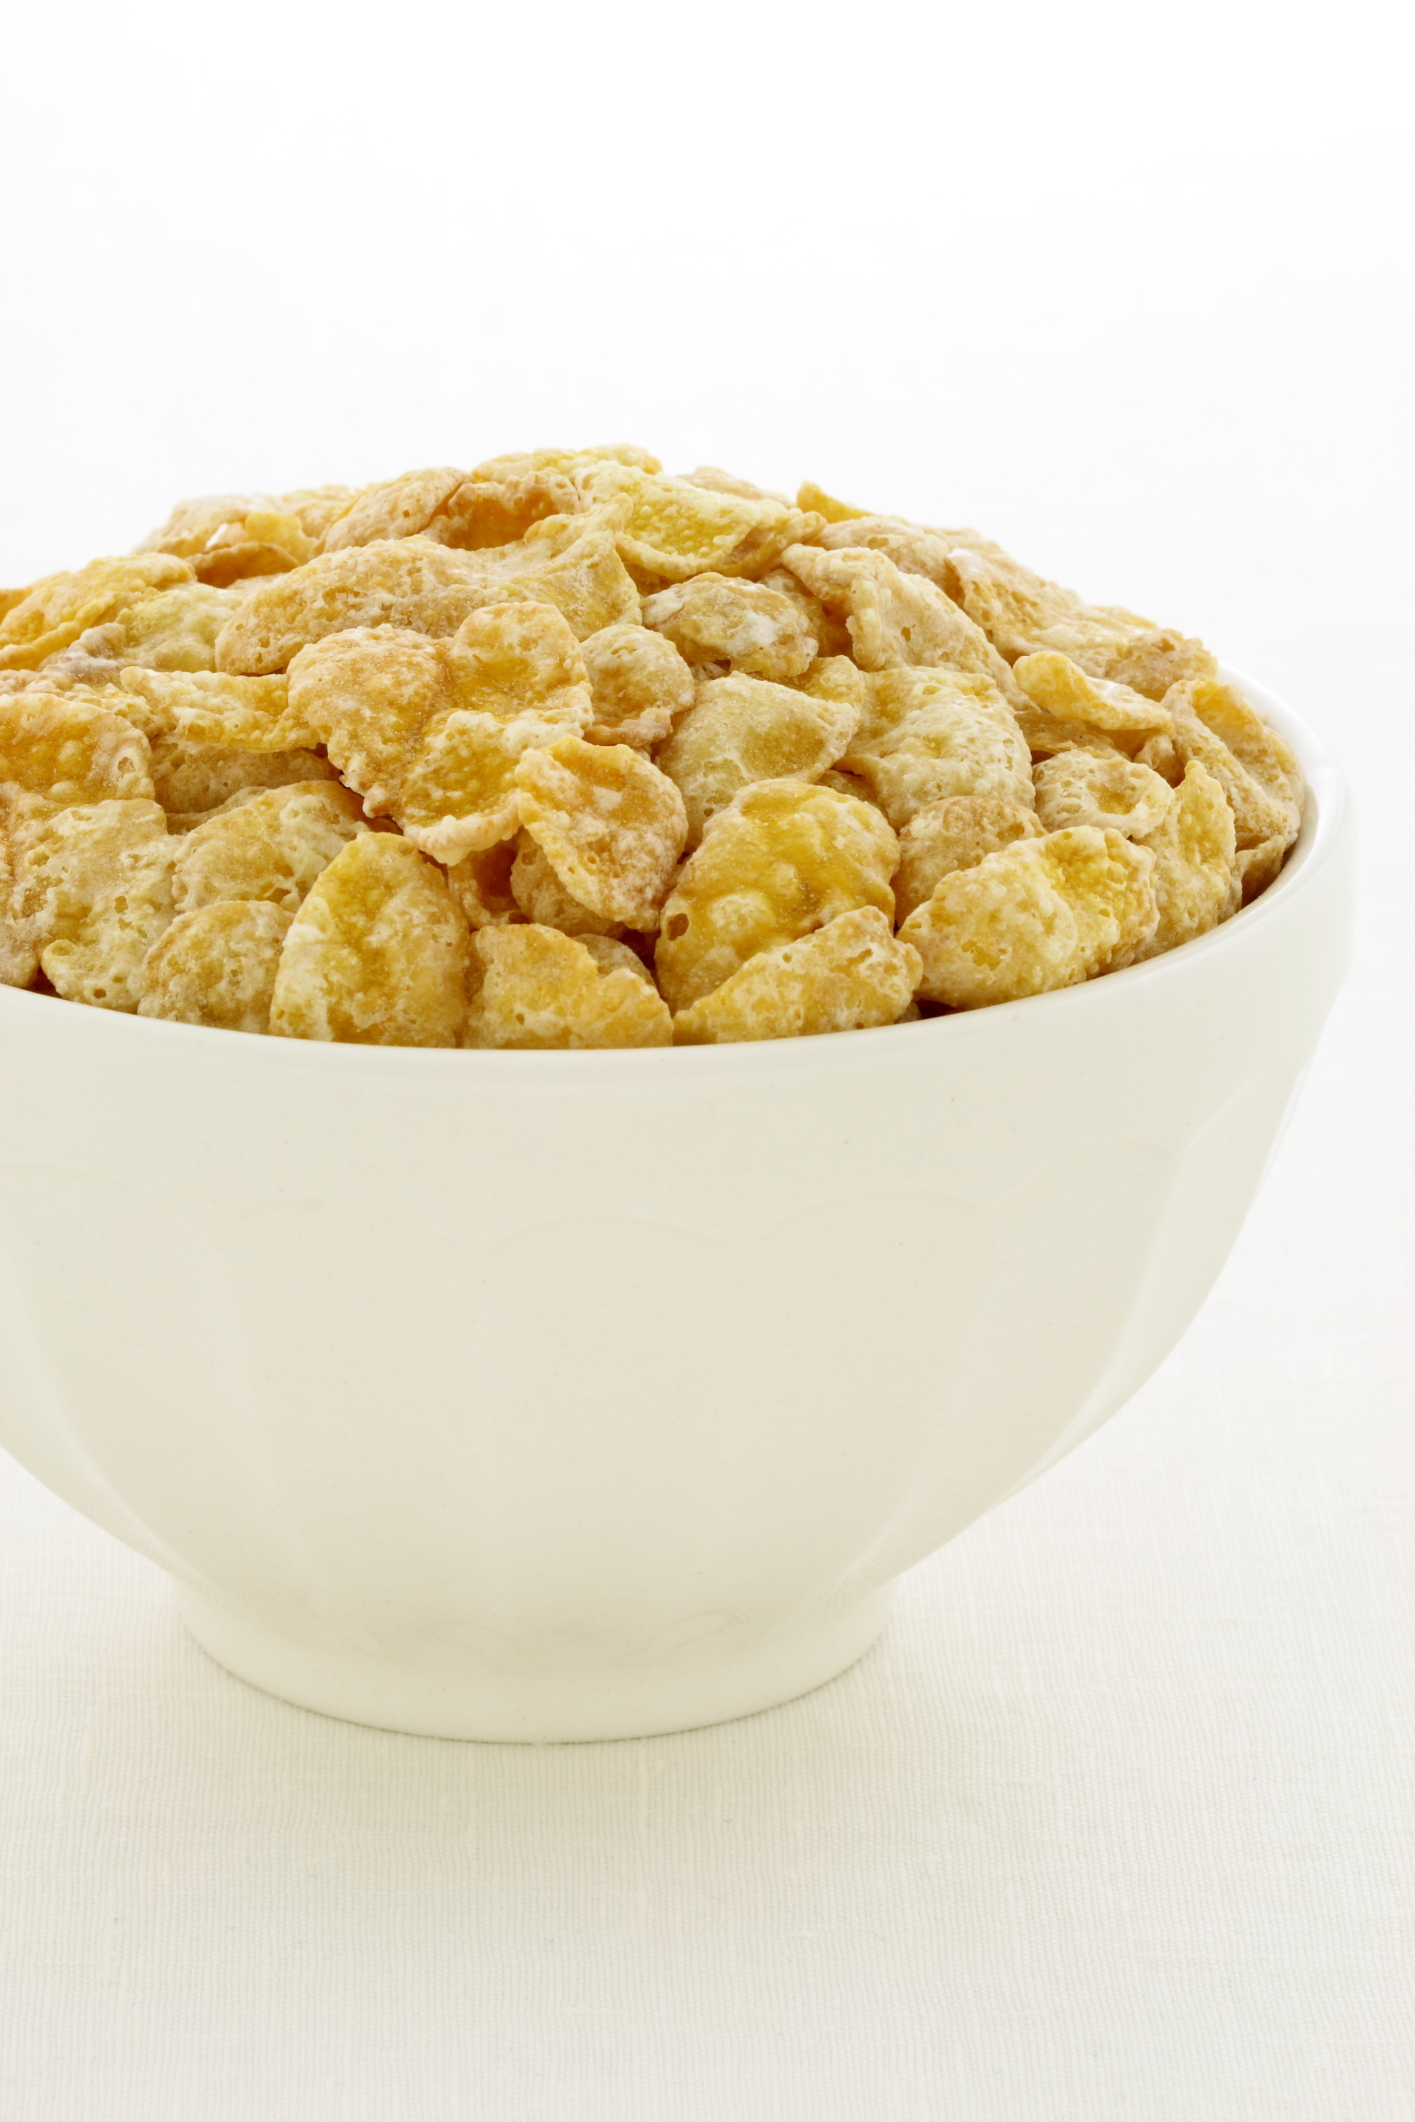 bowl of frosted flakes